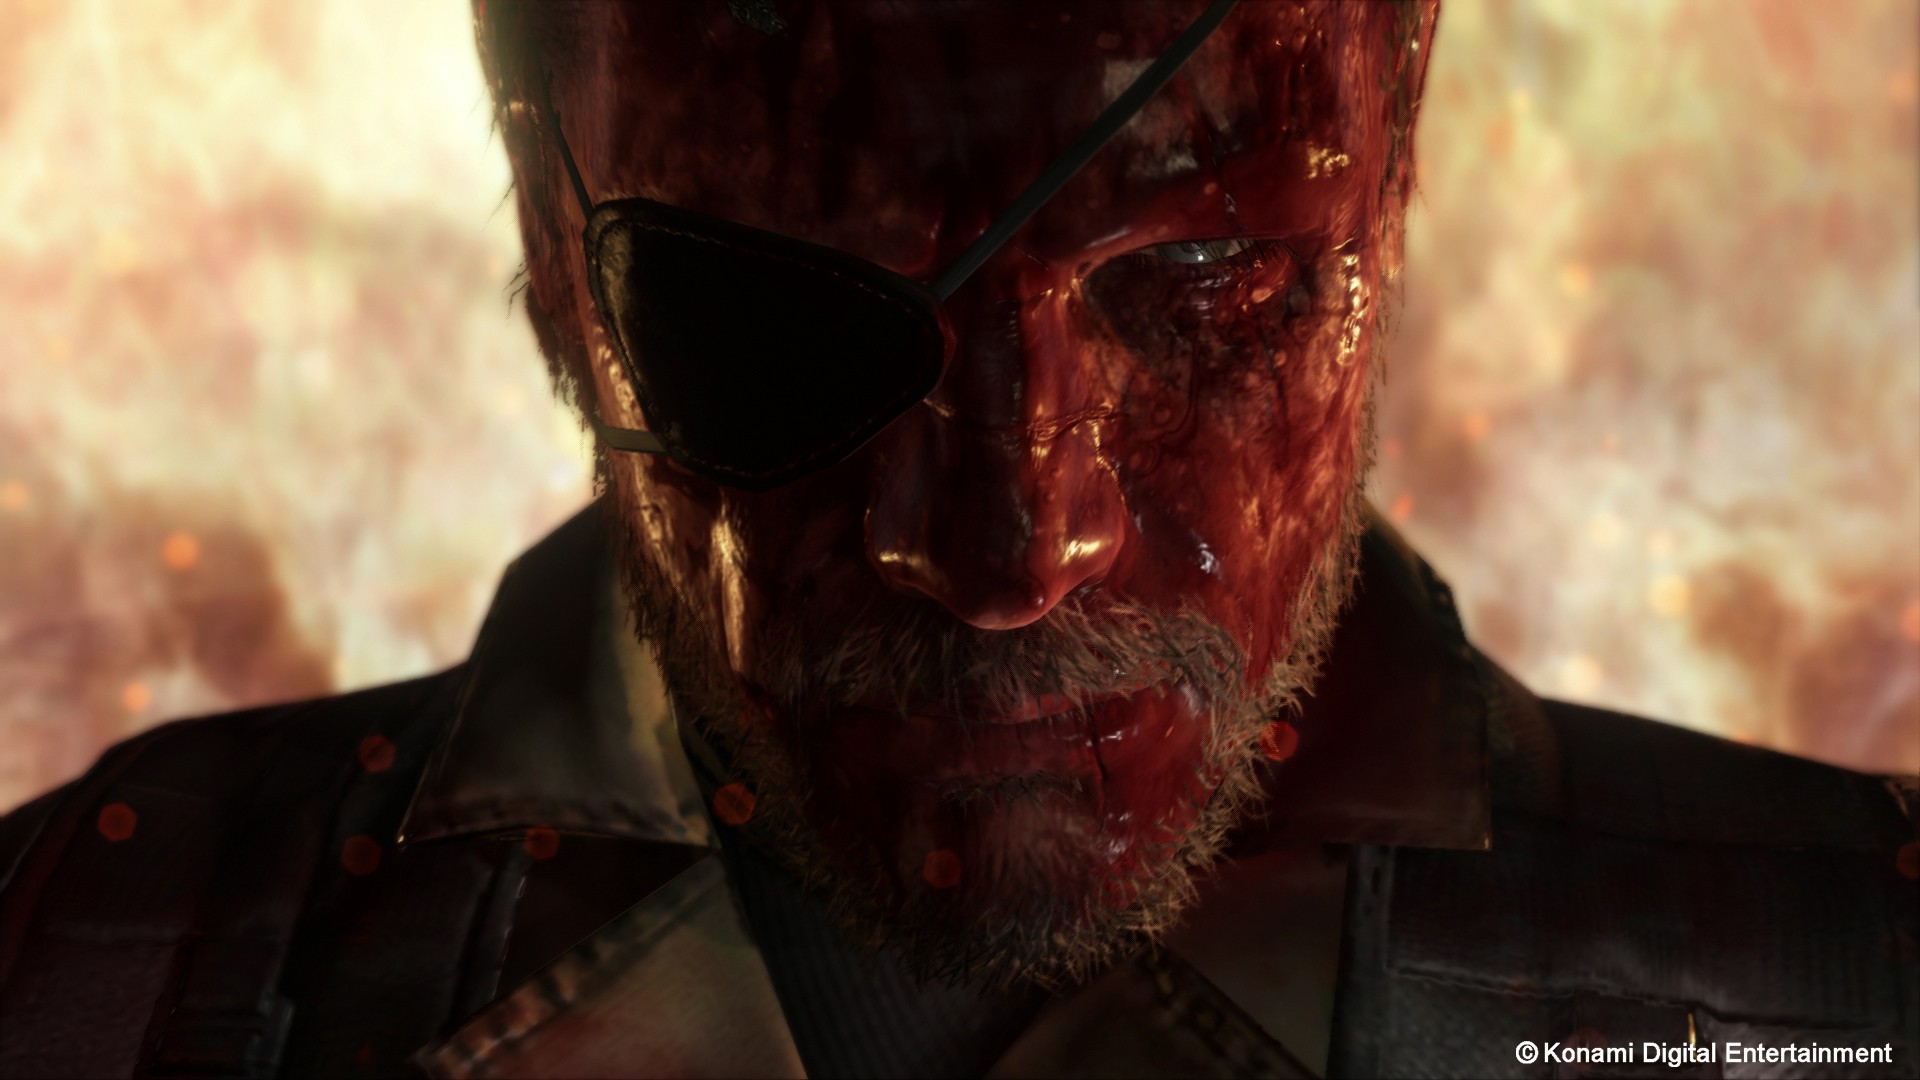 General 1920x1080 Metal Gear Solid V: The Phantom Pain Metal Gear Solid blood konami eyepatches video game characters video game men watermarked face men